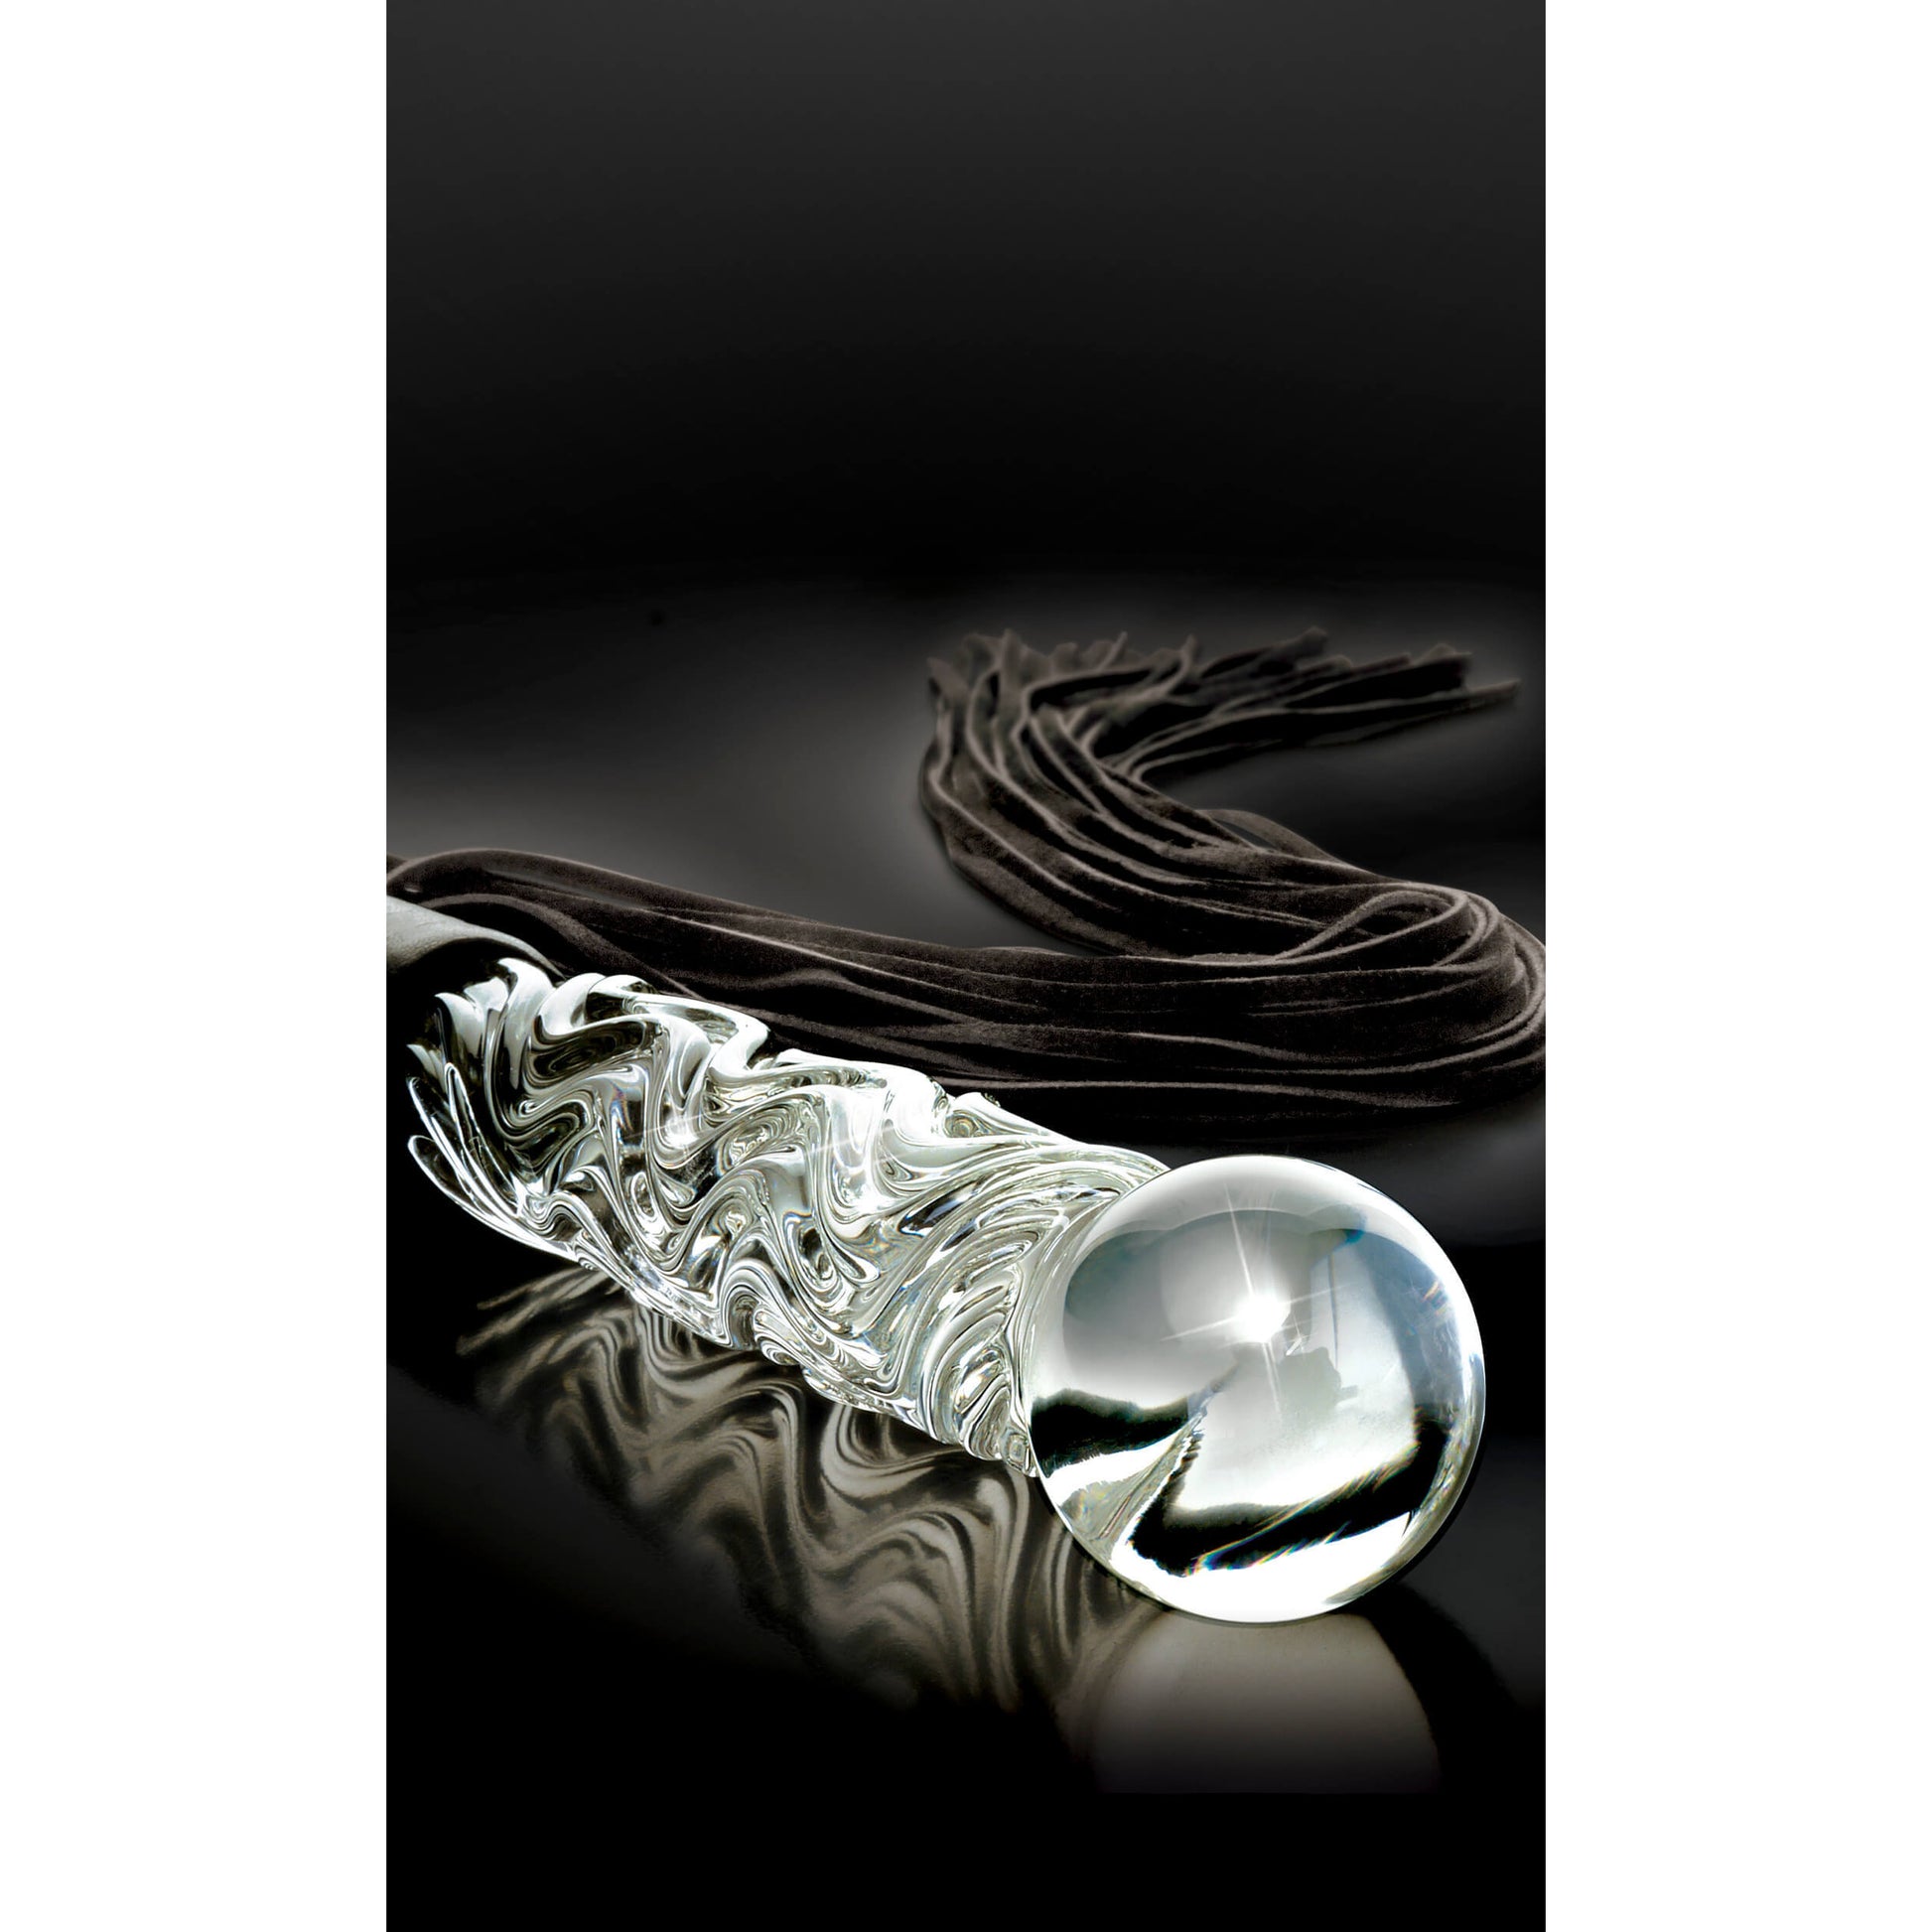 Icicles No. 38 - Glass Flogger and Dildo - by The Bigger O online sex toy shop. USA, Canada and UK shipping available.